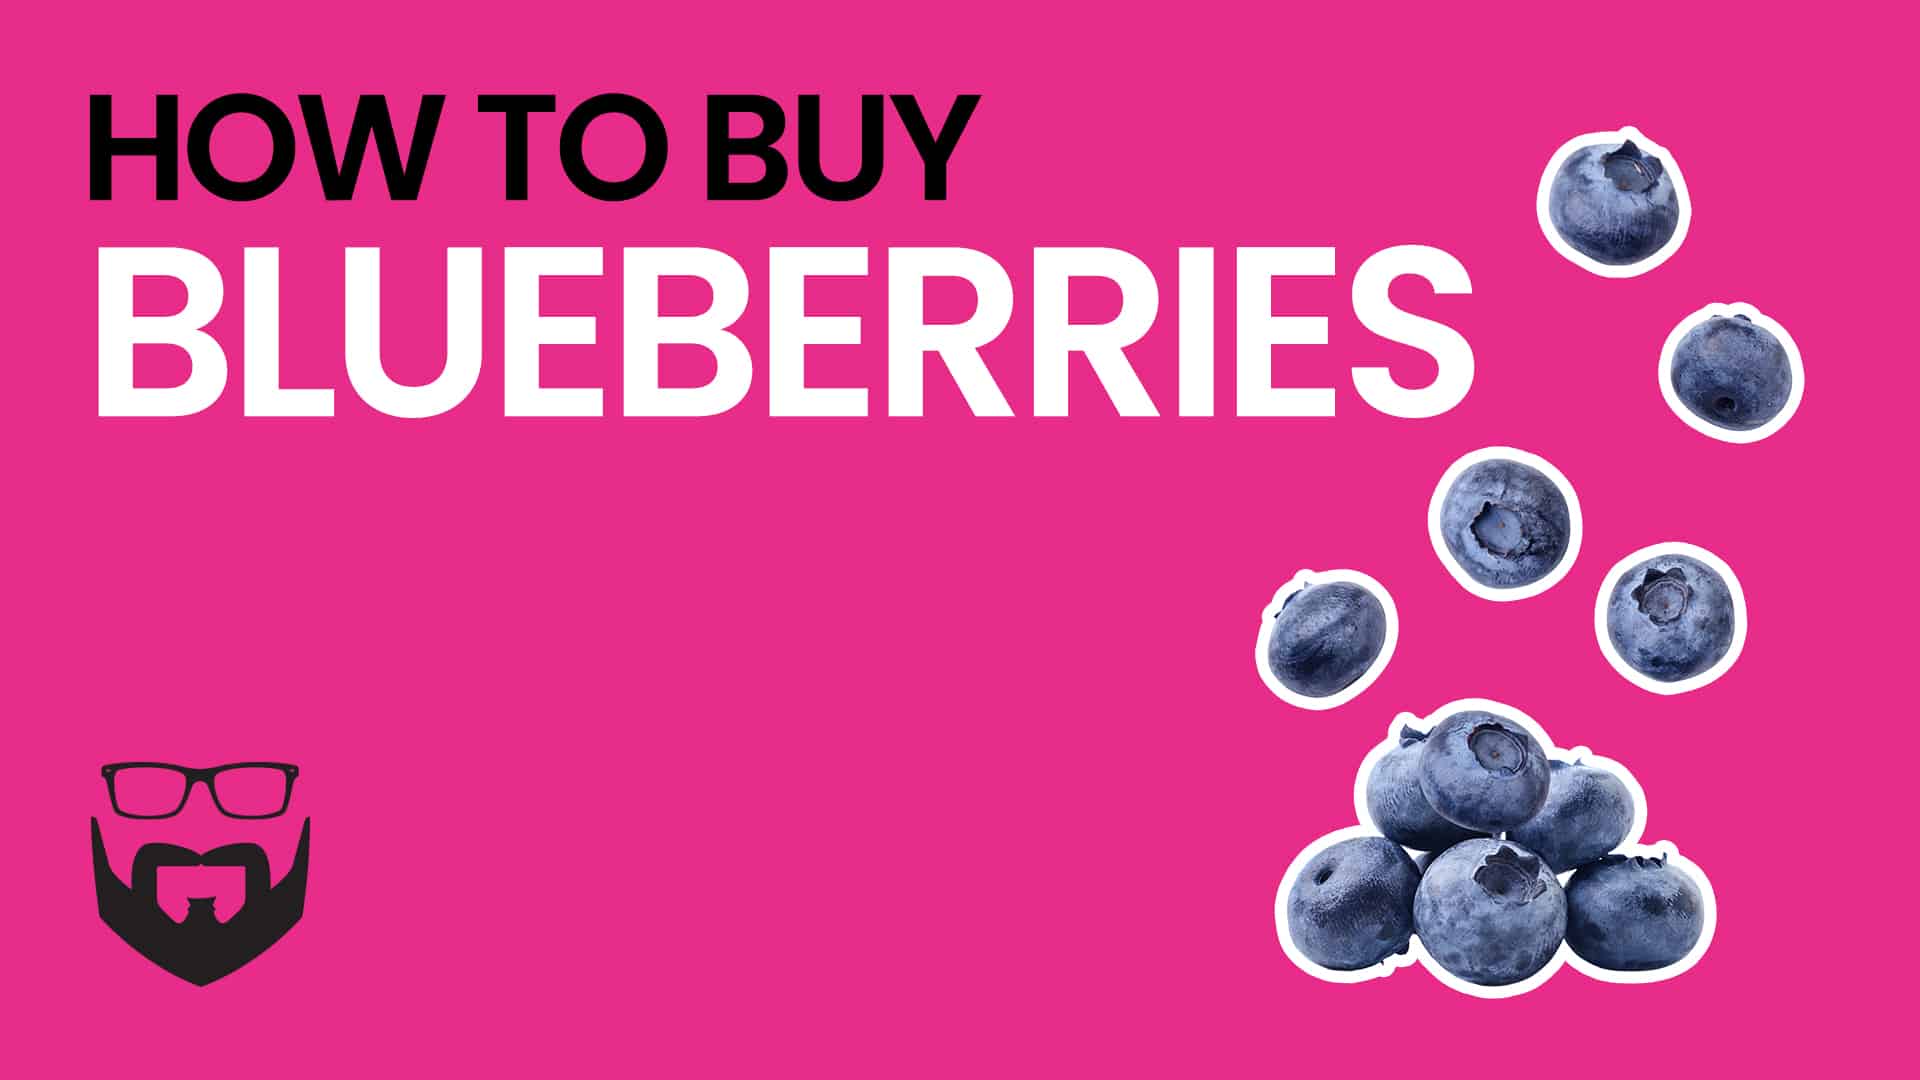 How to Buy Blueberries Video - Pink